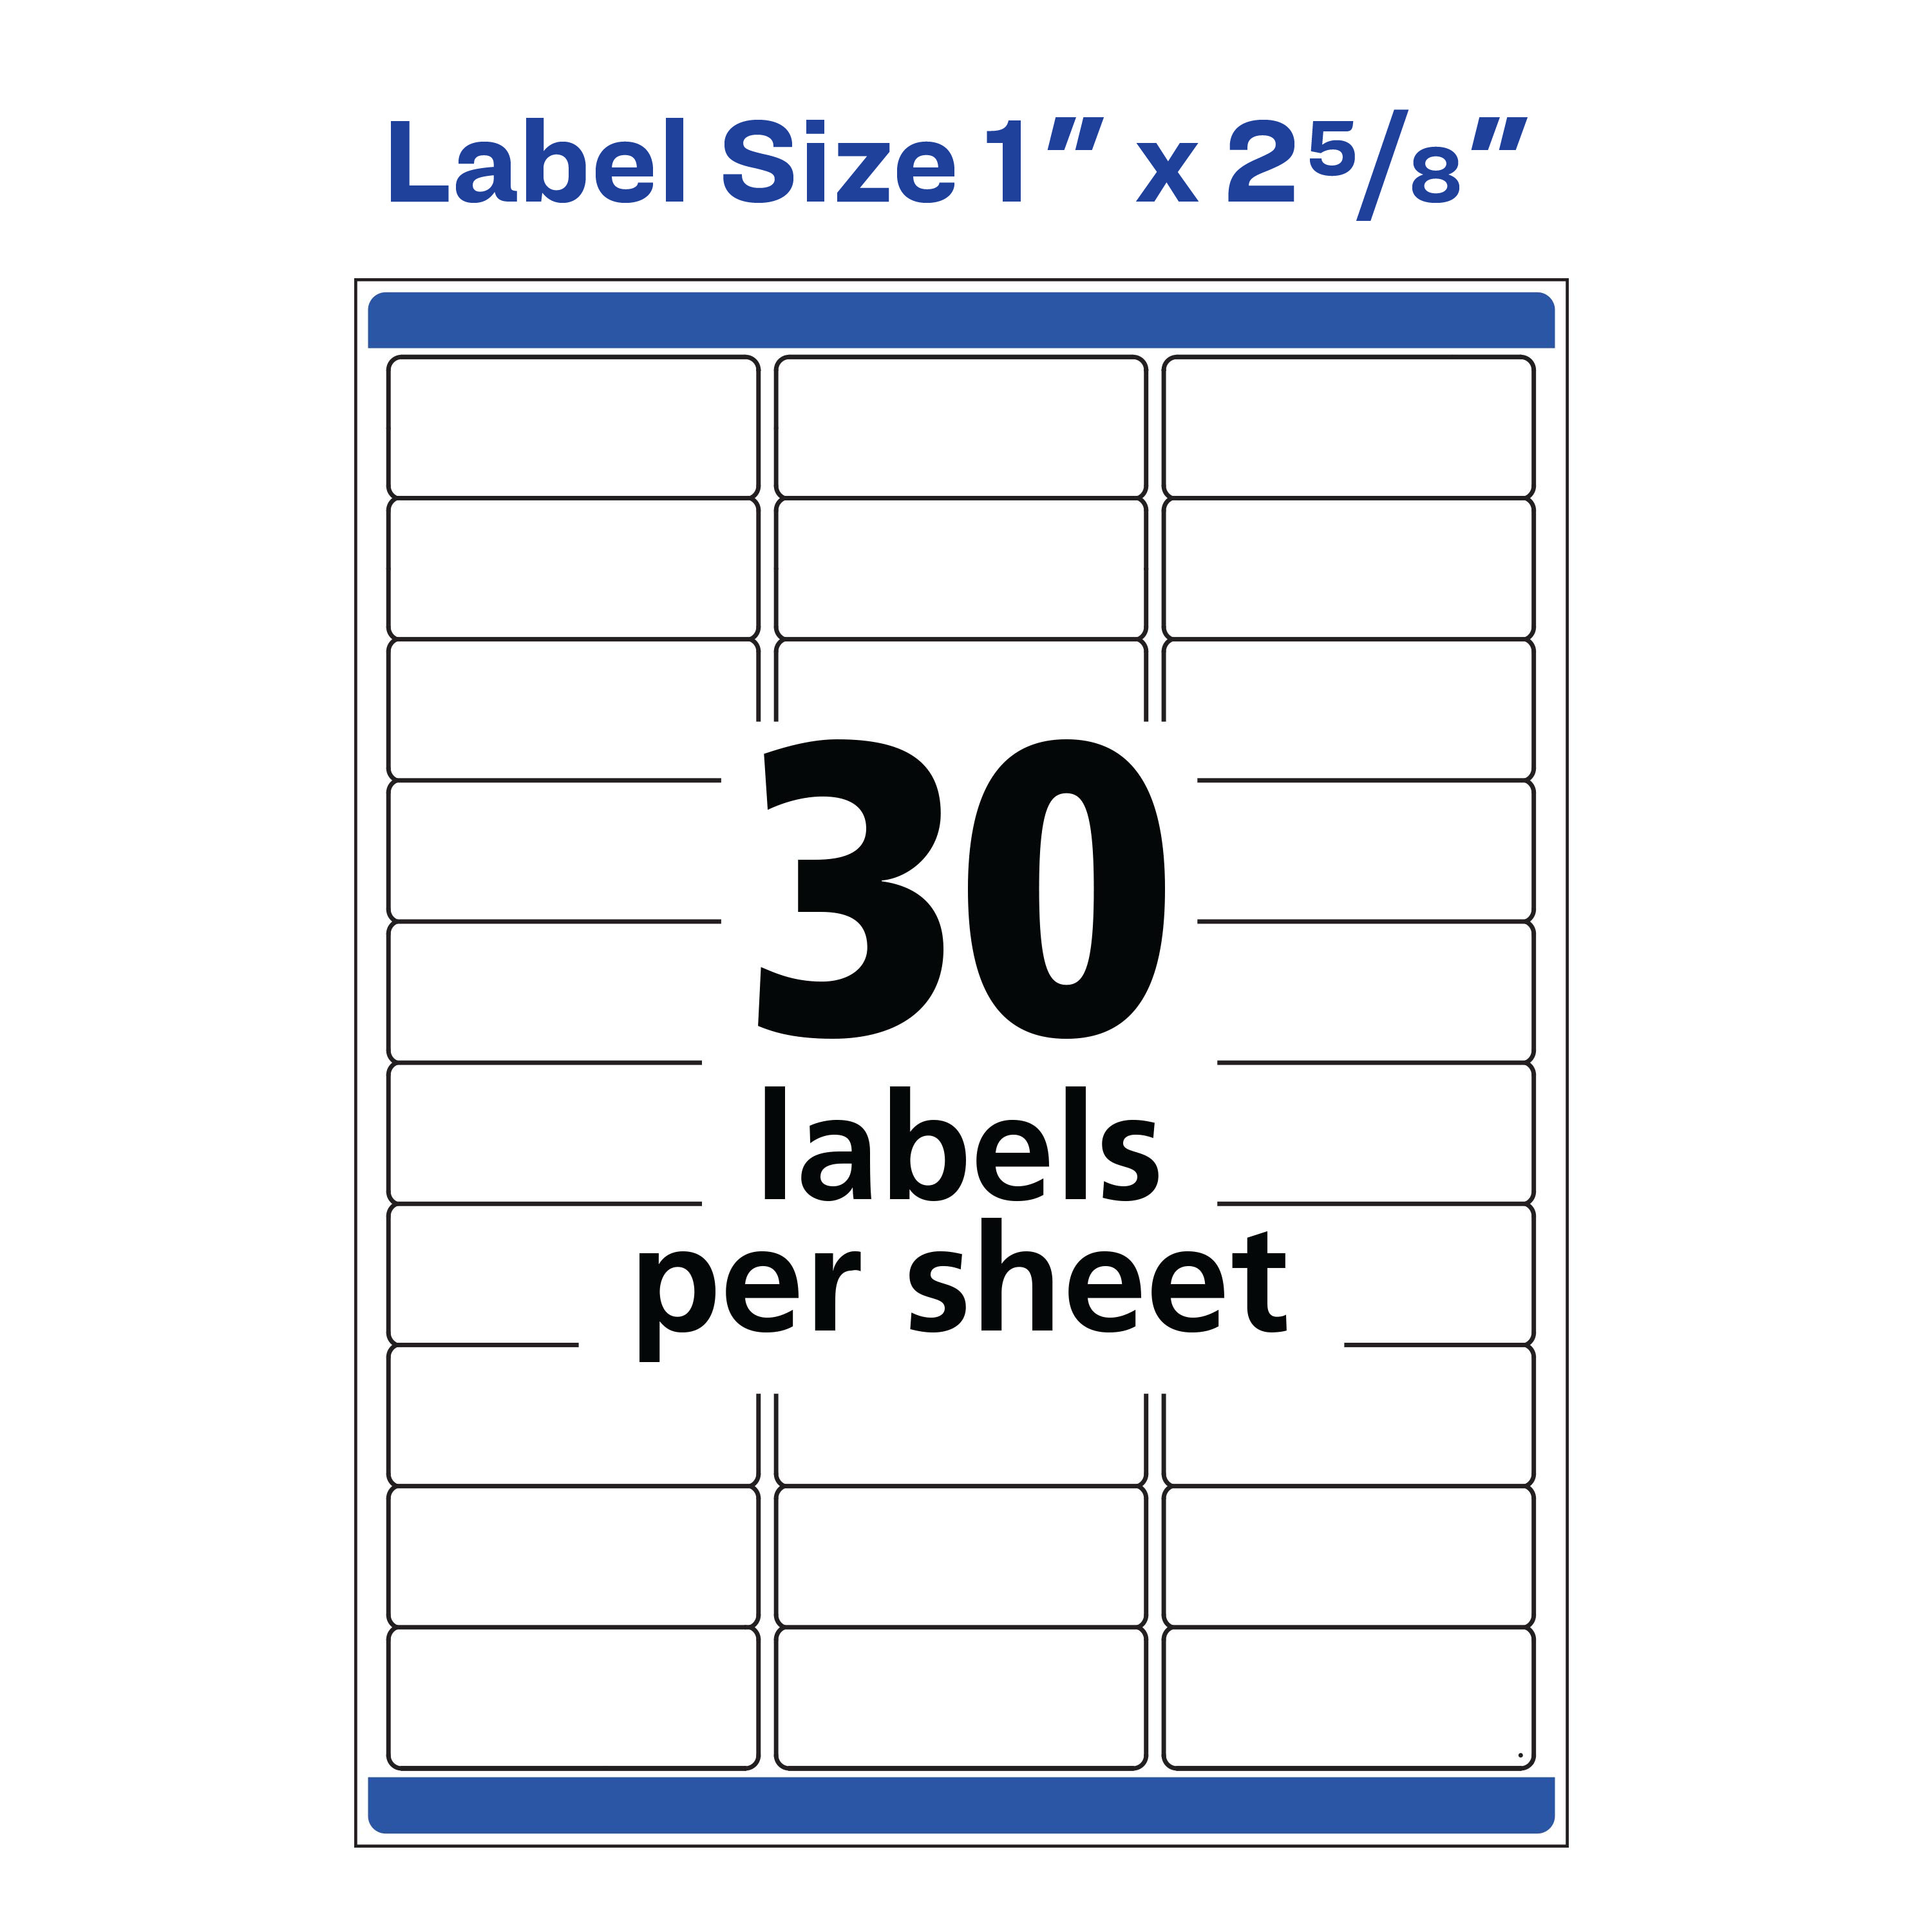 Avery Waterproof Address Labels with Ultrahold Permanent Adhesive, 1" x  2-5/8", 1,500 Labels for Laser Printers (5520)